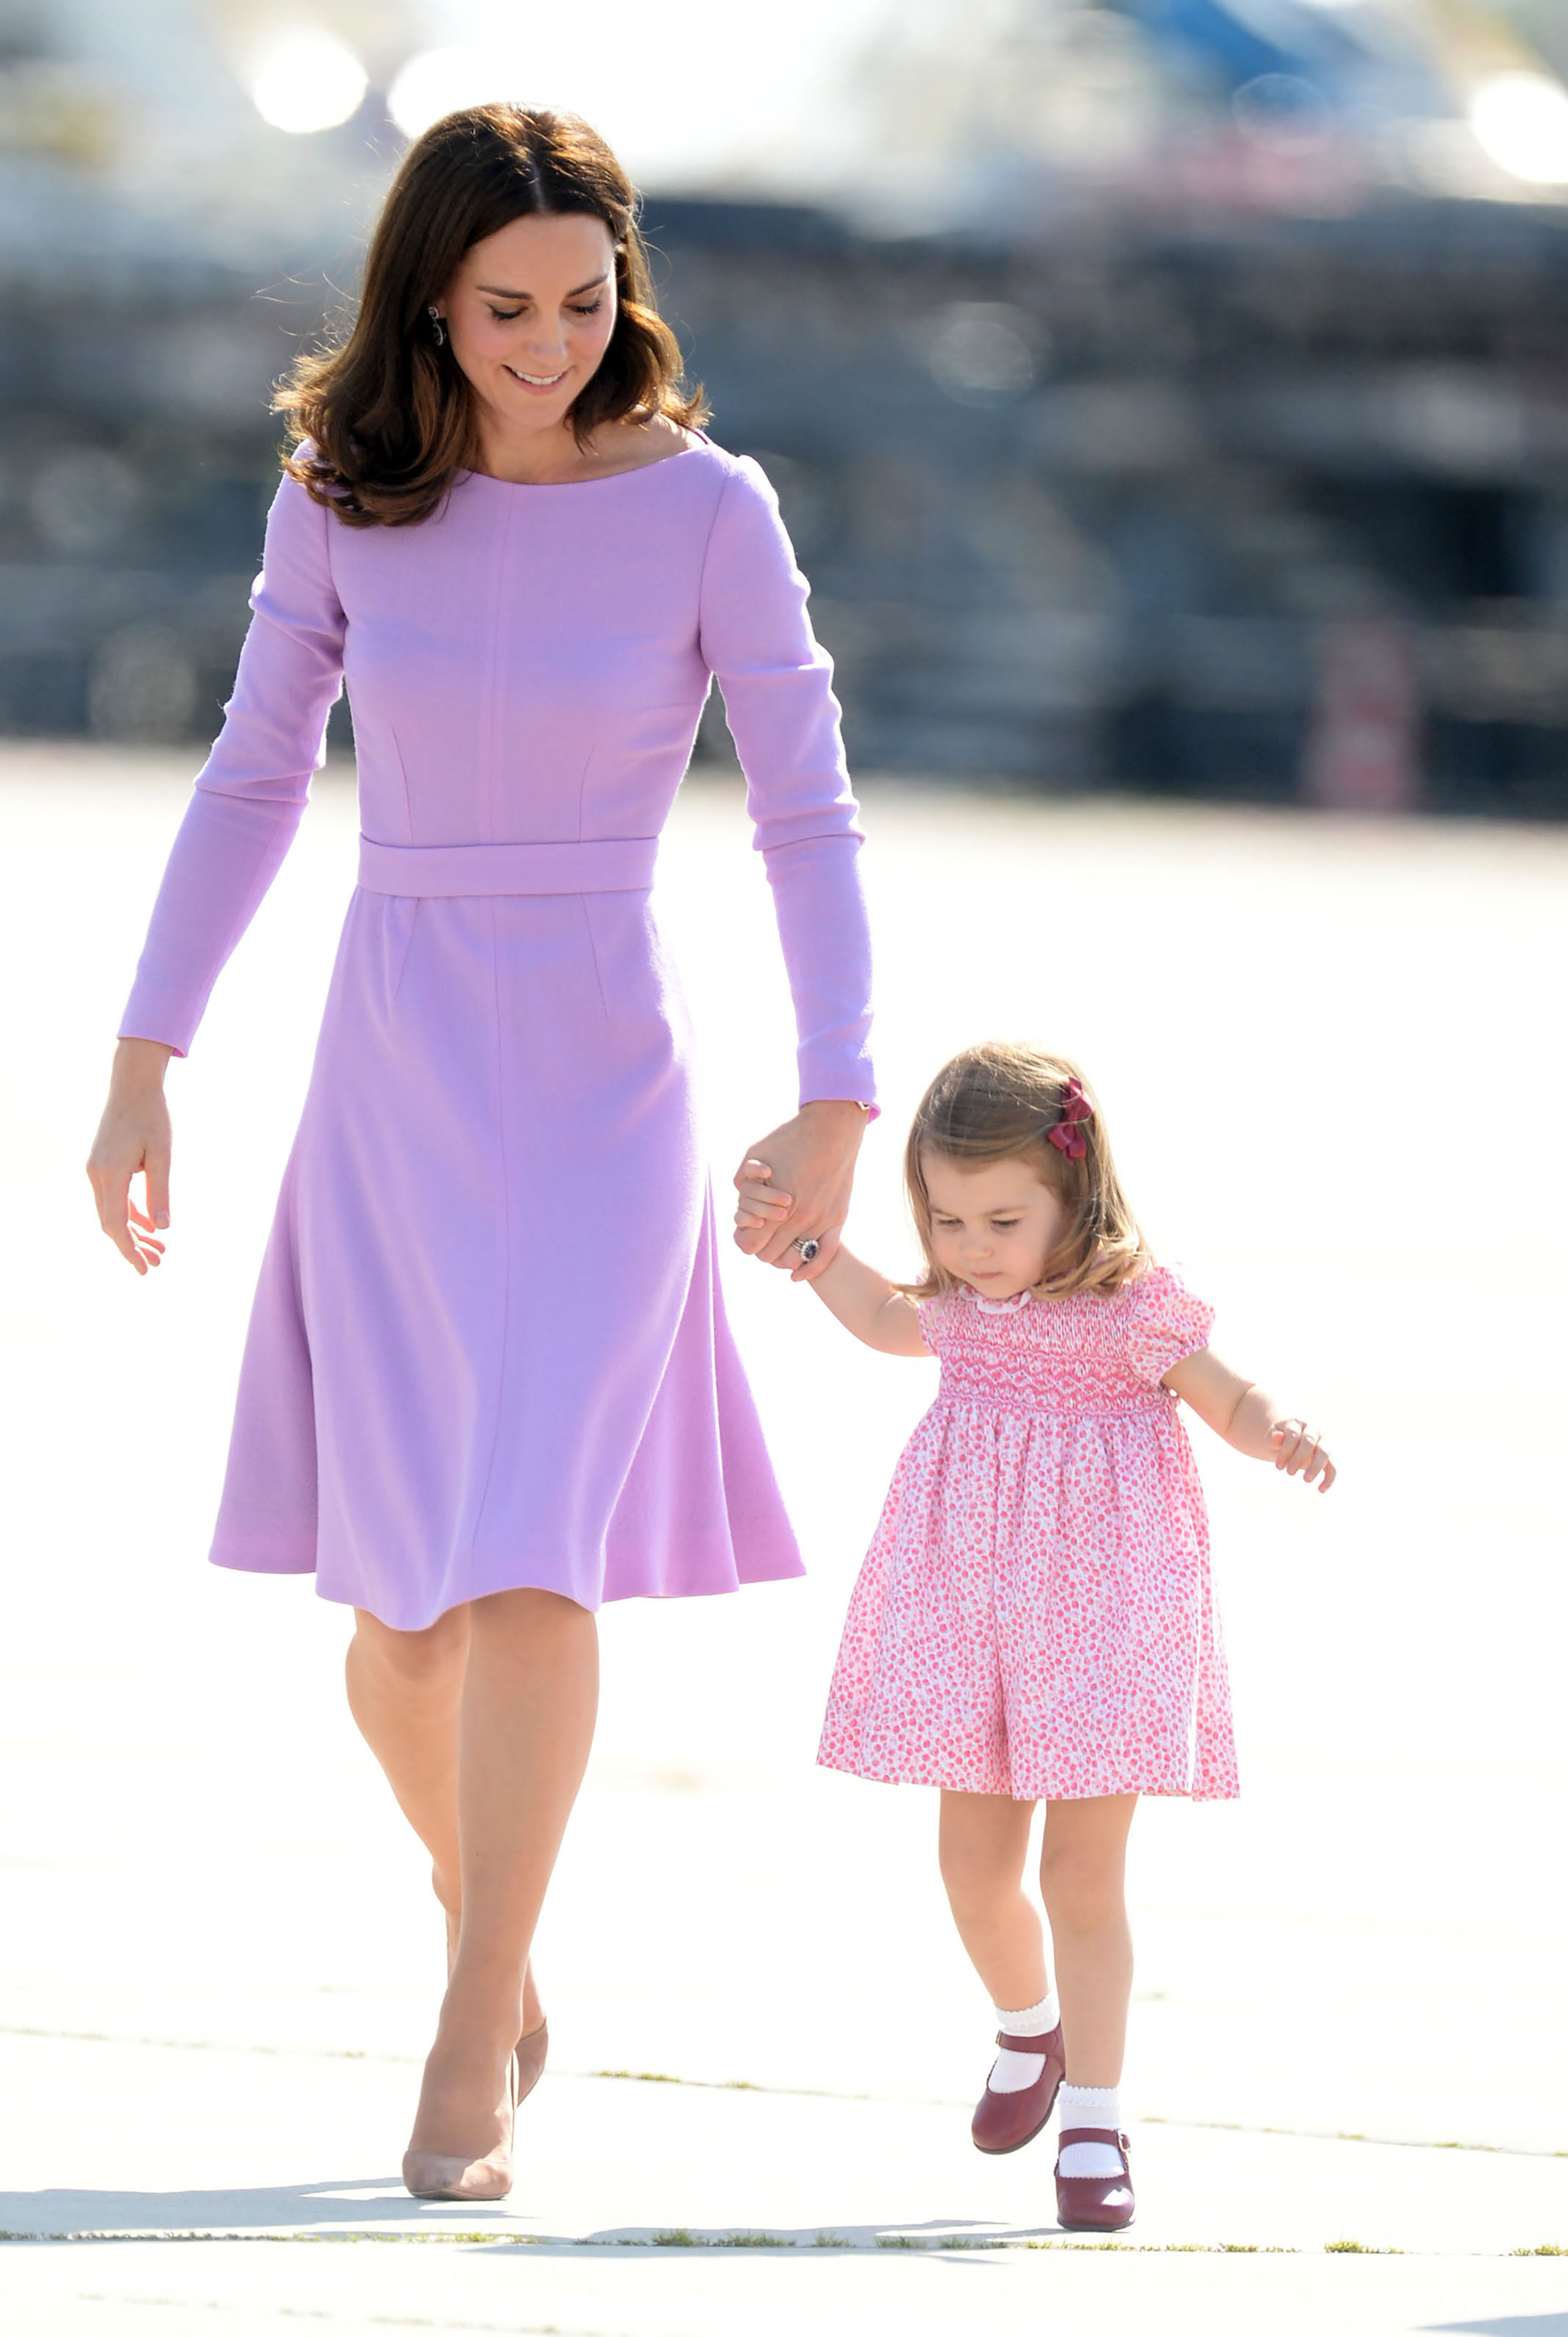 Catherine, Duchess of Cambridge and Princess Charlotte of Cambridge depart from Hamburg airport on the last day of their official visit to Poland and Germany on July 21, 2017.